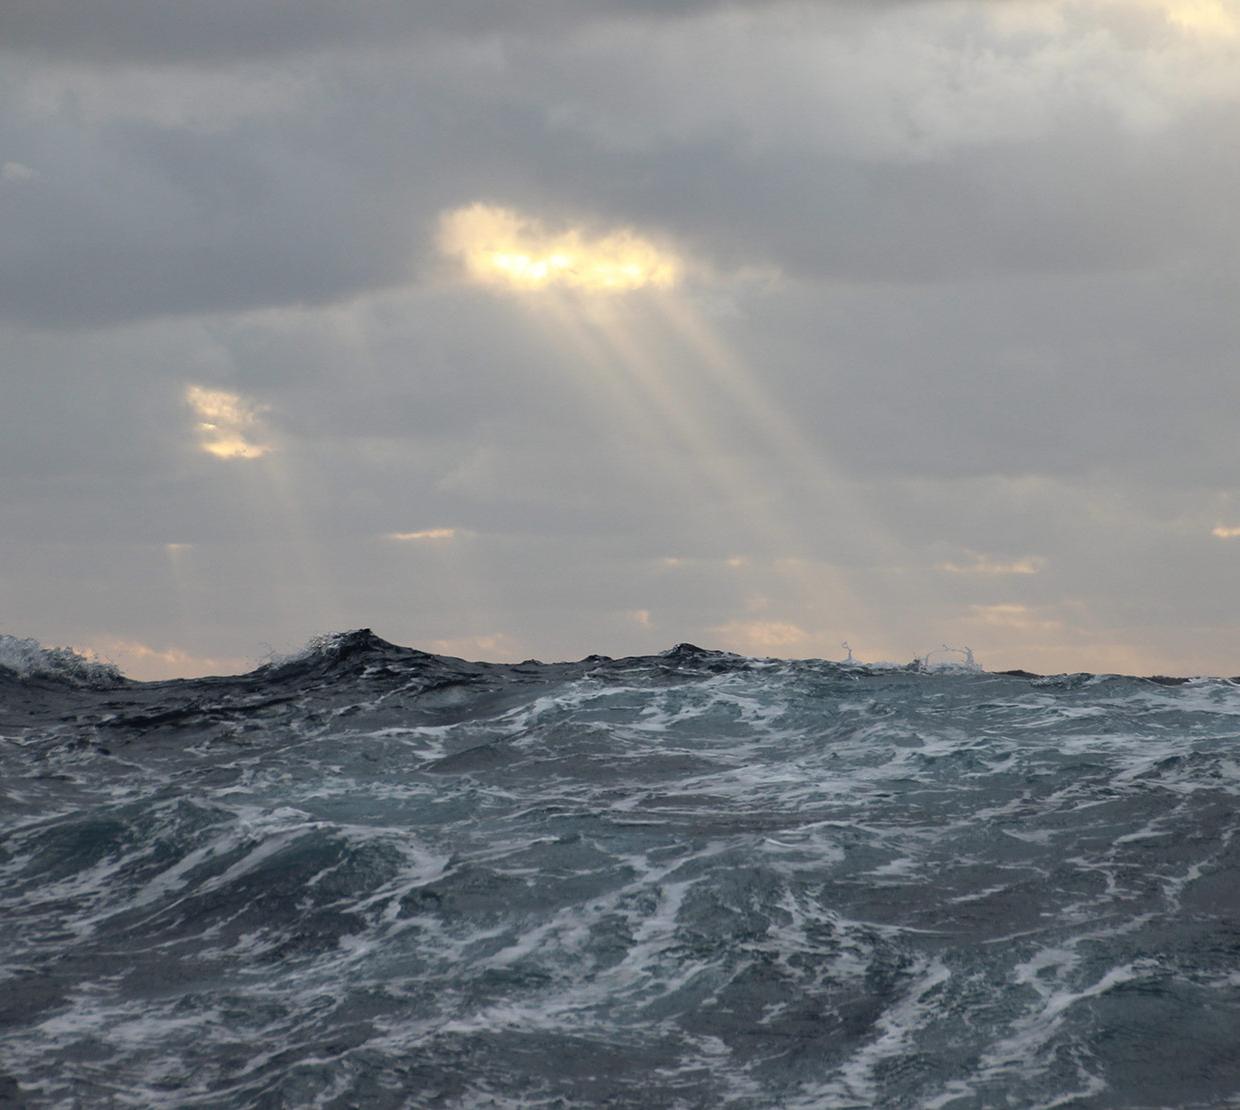 Ocean waves on a dimly lit day with the sun peering through the clouds.